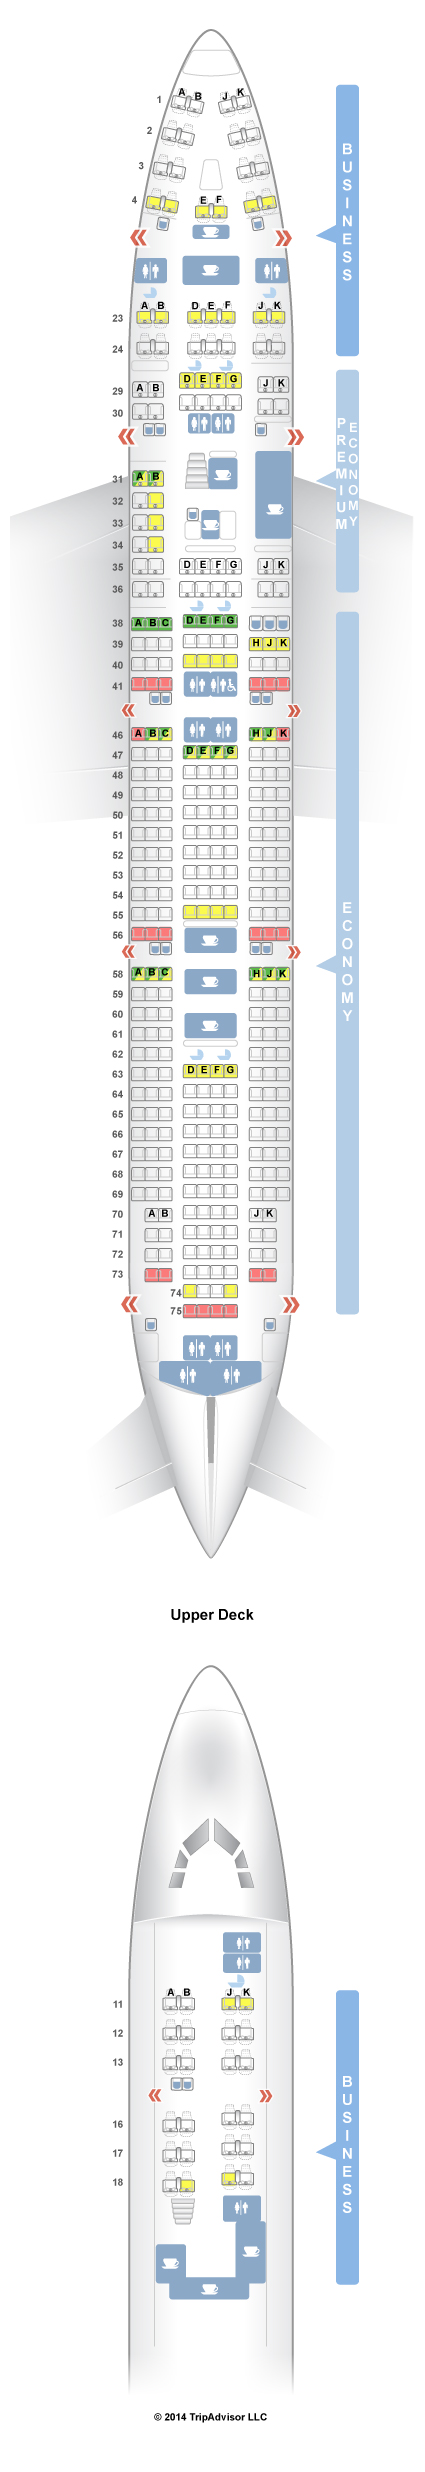 What is the seating plan on a Boeing 744 airplane?